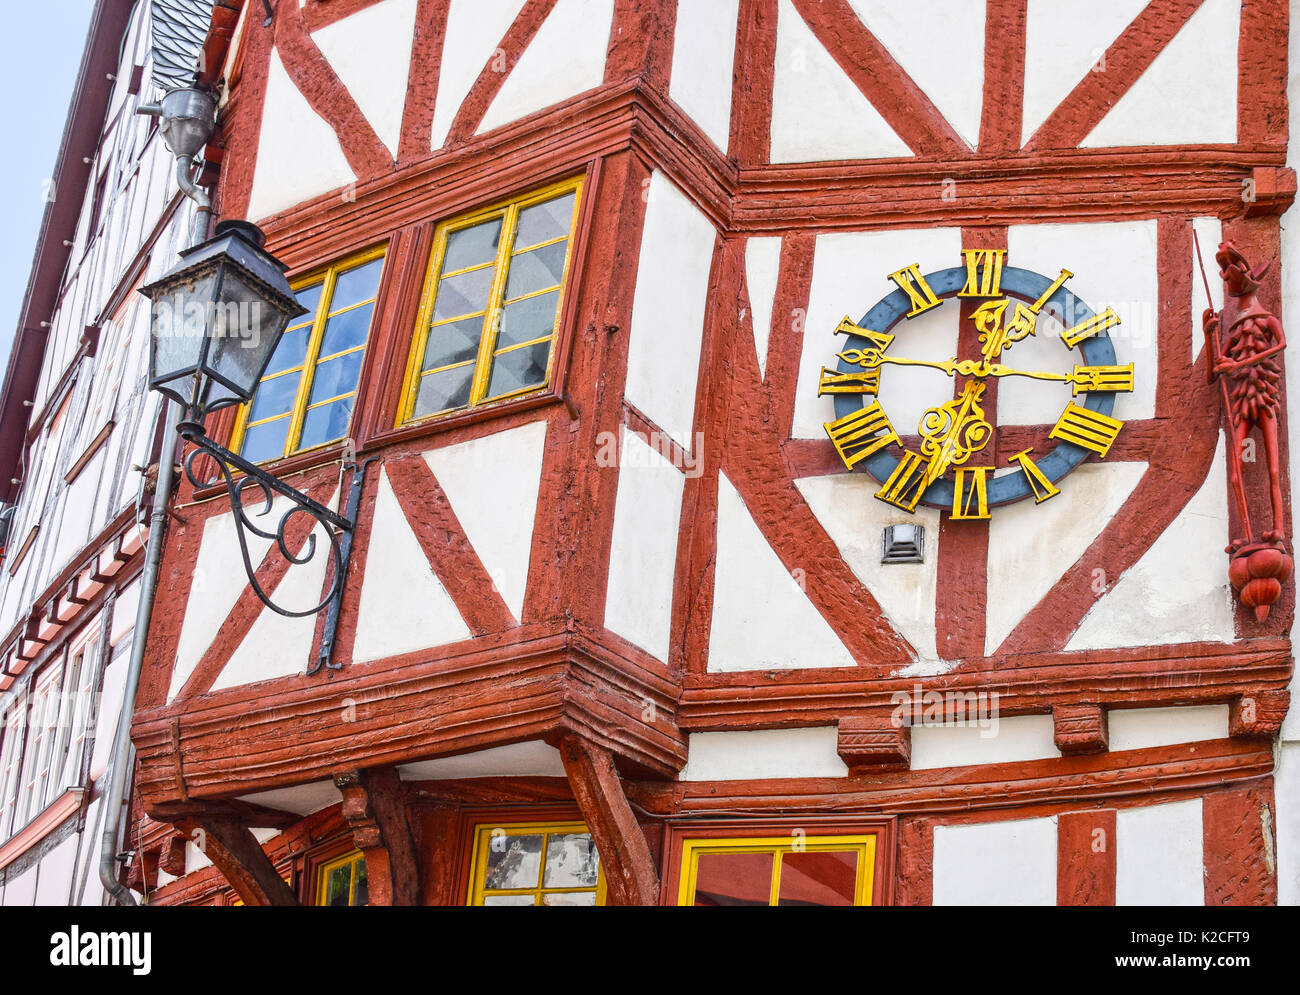 LIMBURG, GERMANY - MAY 11, 2017: Half-timbered house with clock and carved wooden figure in Limburg an der Lahn, Germany. The medieval city on the riv Stock Photo